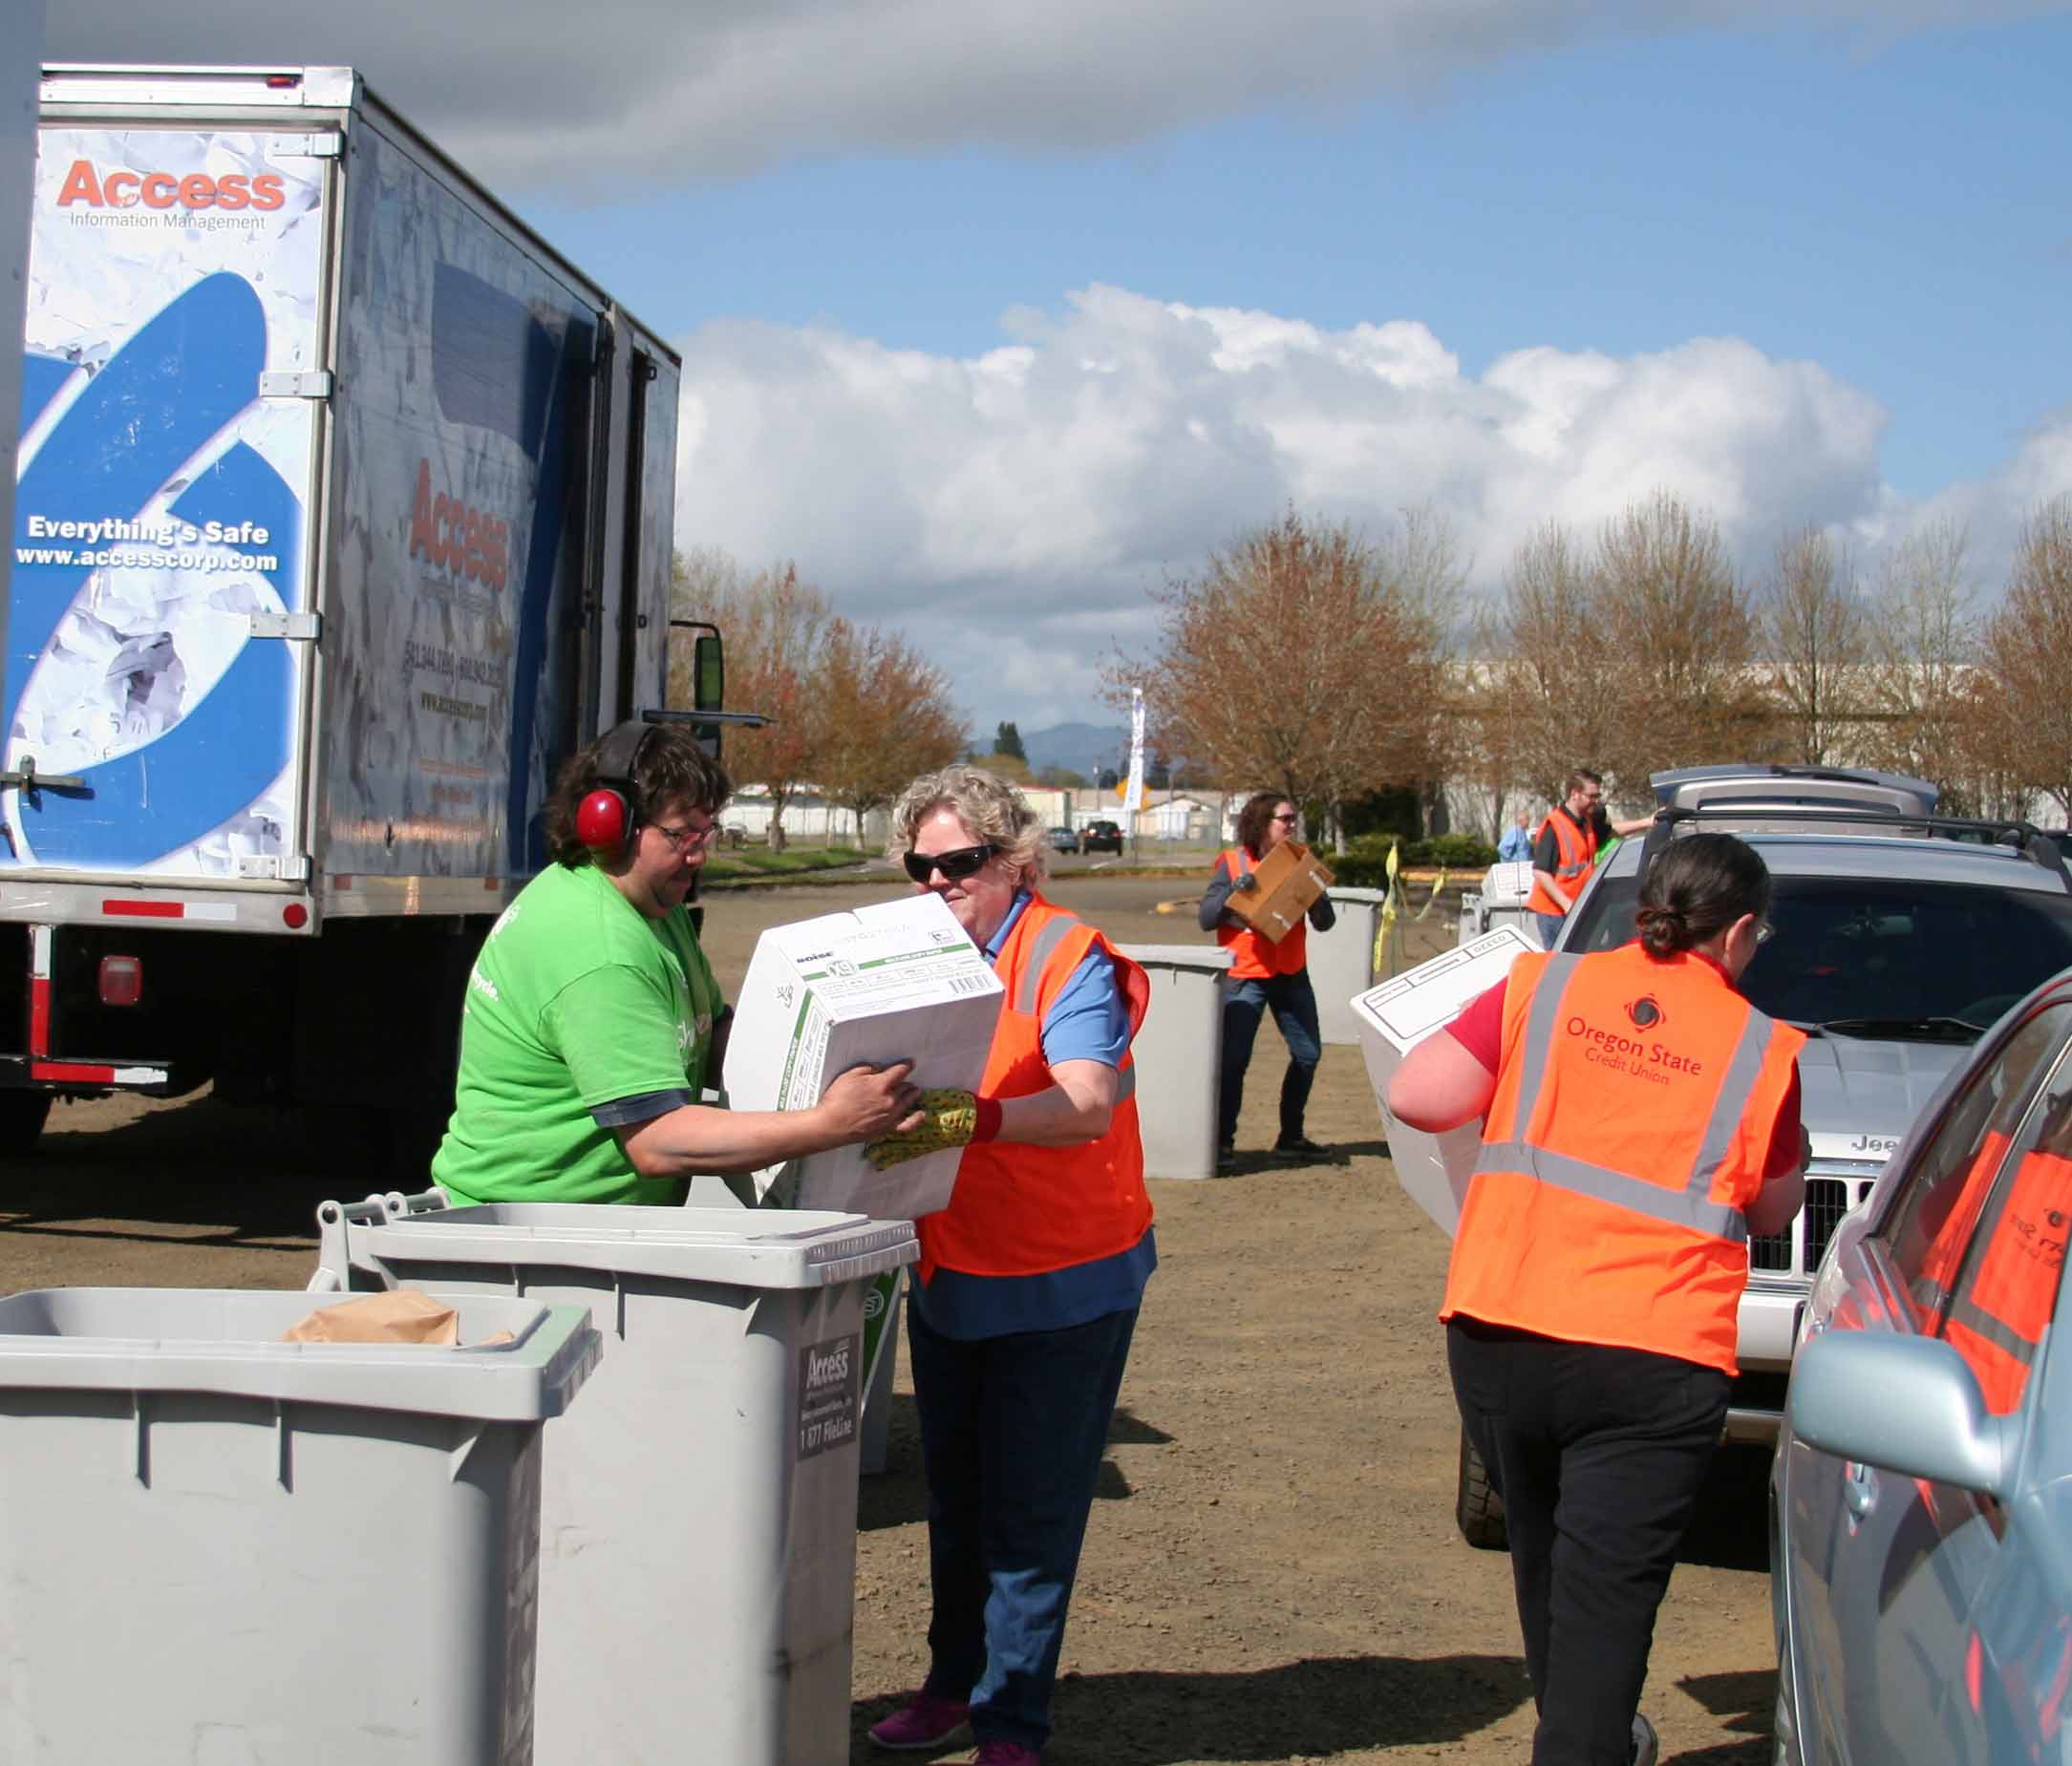 Shred day volunteers - Oregon State Credit Union